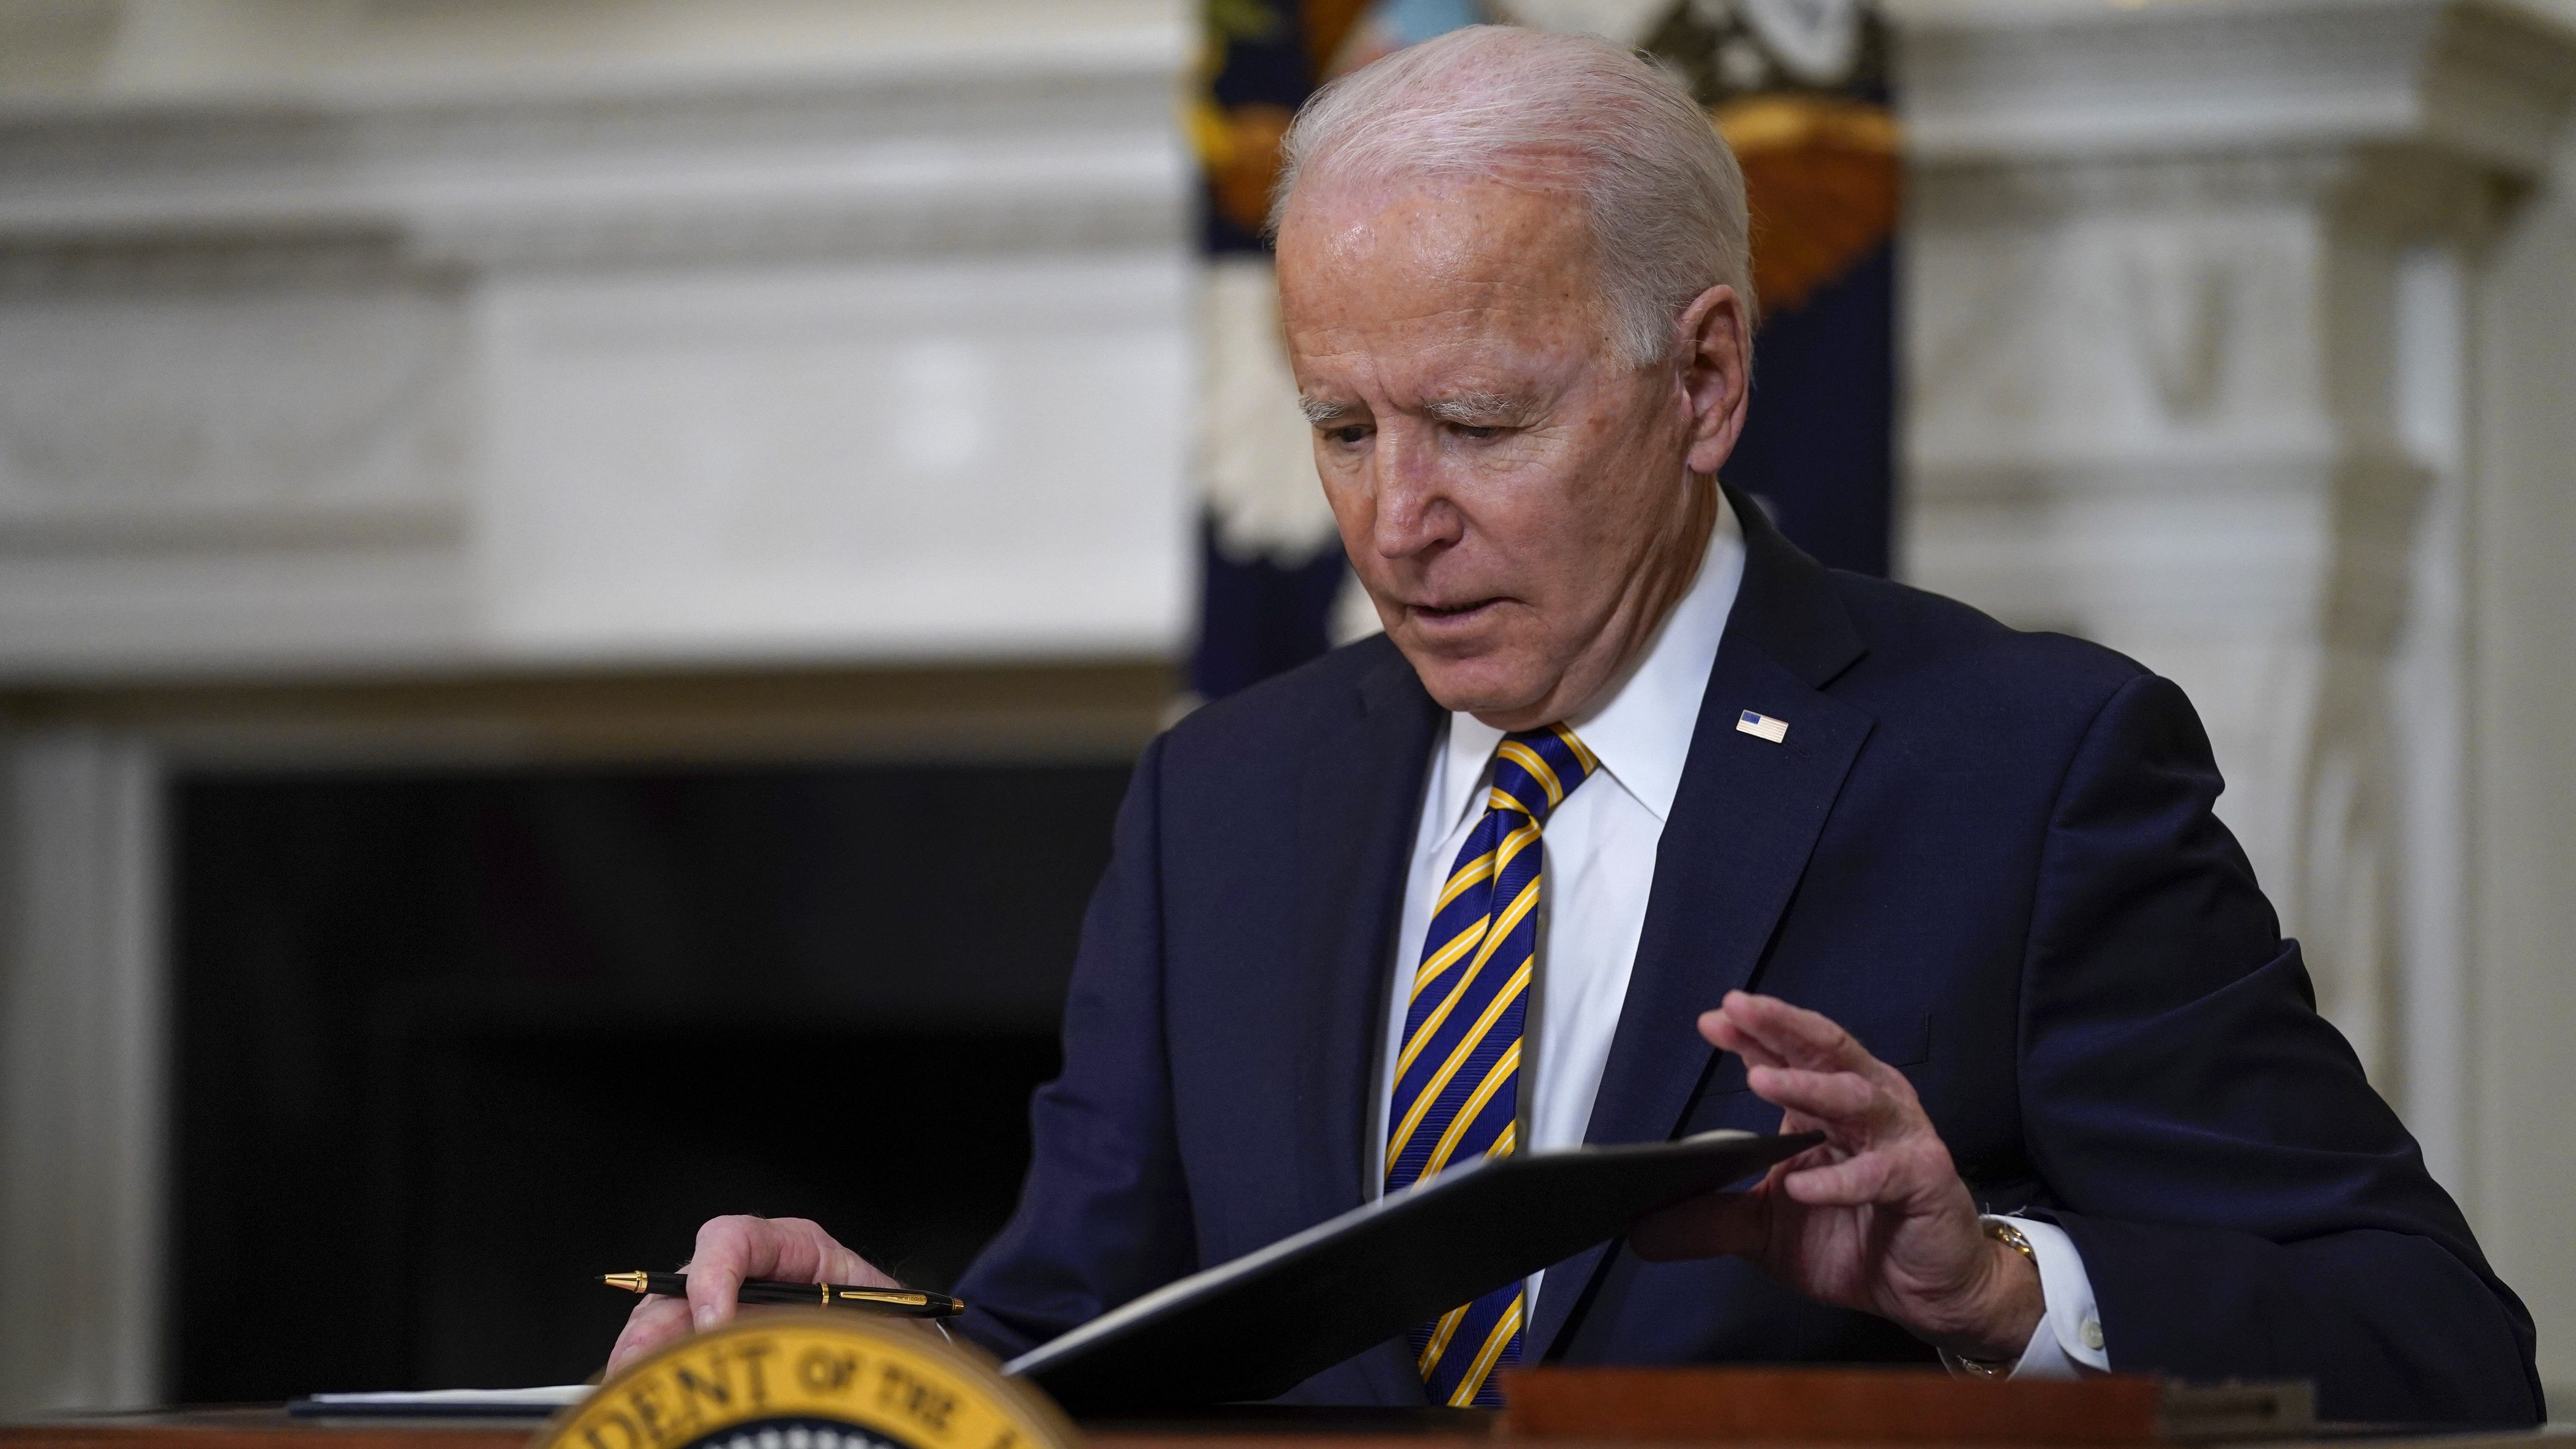 Biden keeps saying ‘follow the science,’ but how often does he?